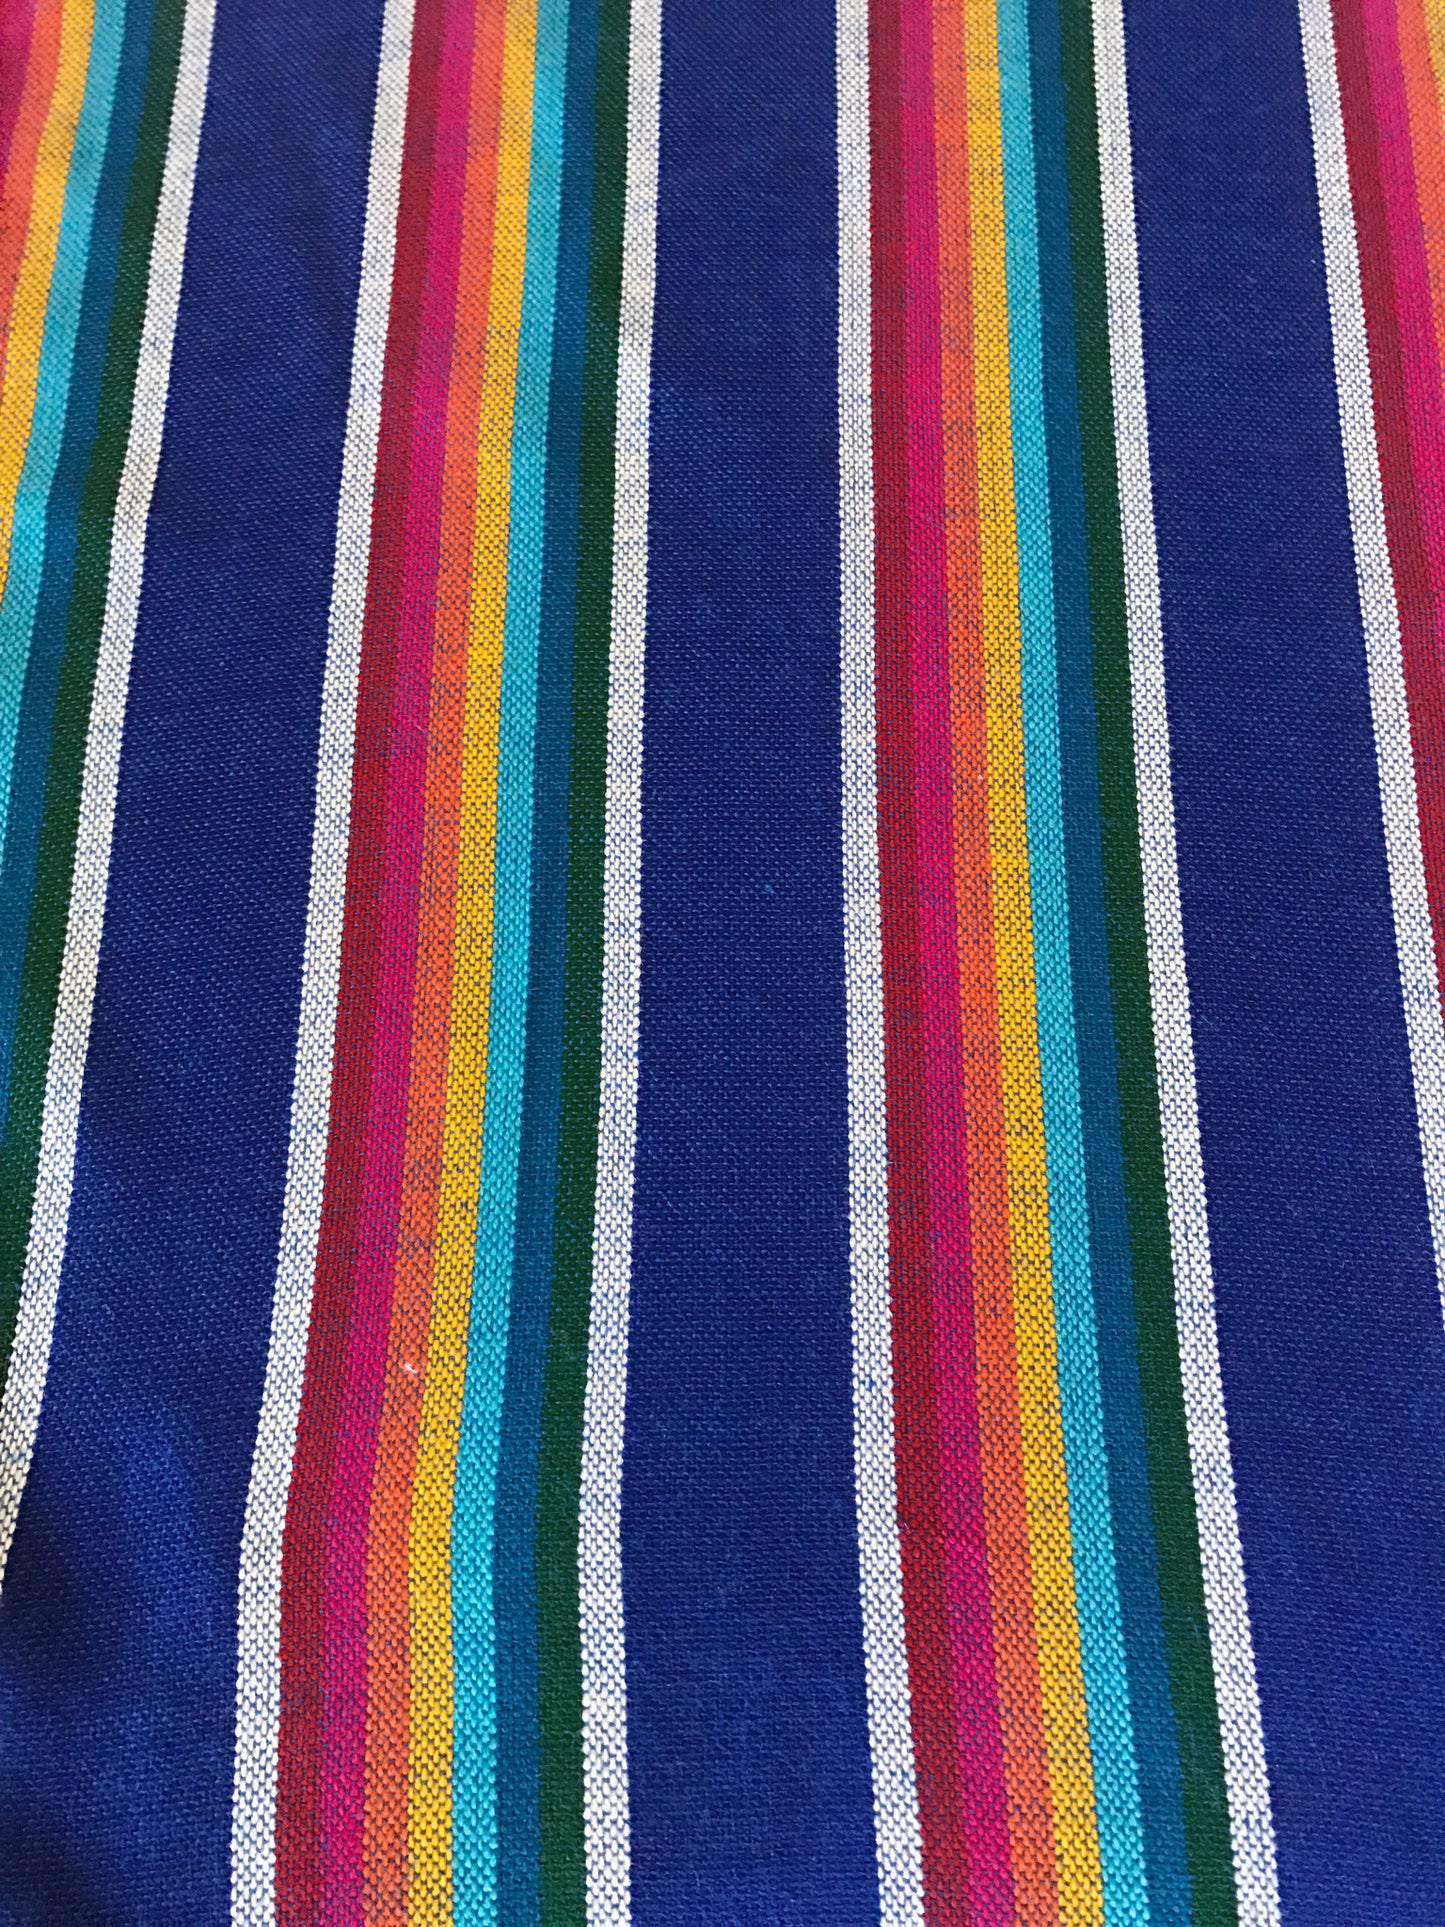 Mexican Table Runner Navy Stripes